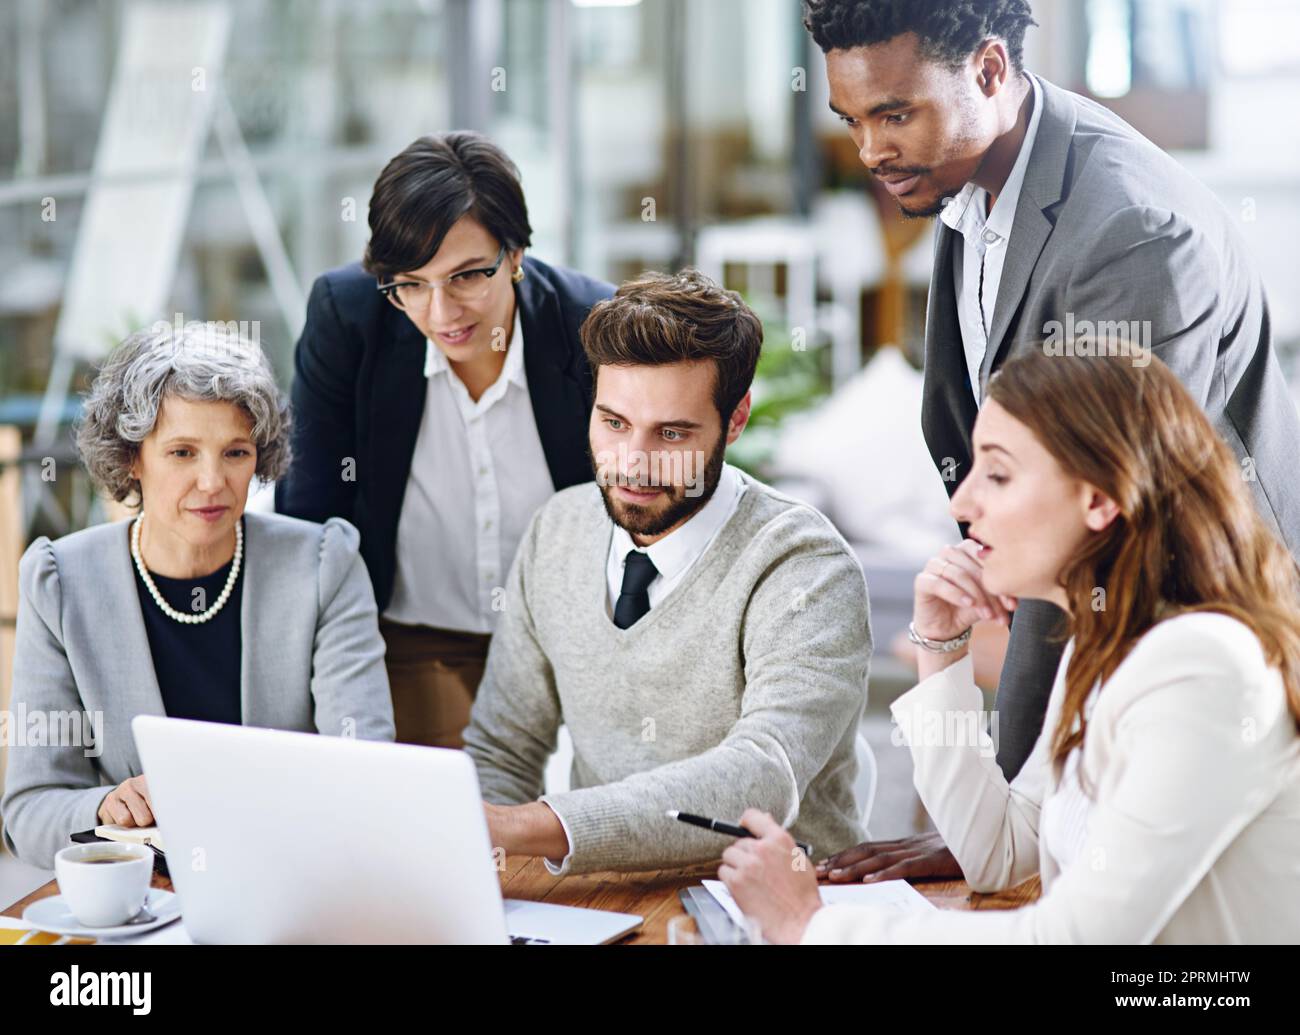 Tackling their challenges with the help of technology. a group of businesspeople working together on a laptop in an office. Stock Photo